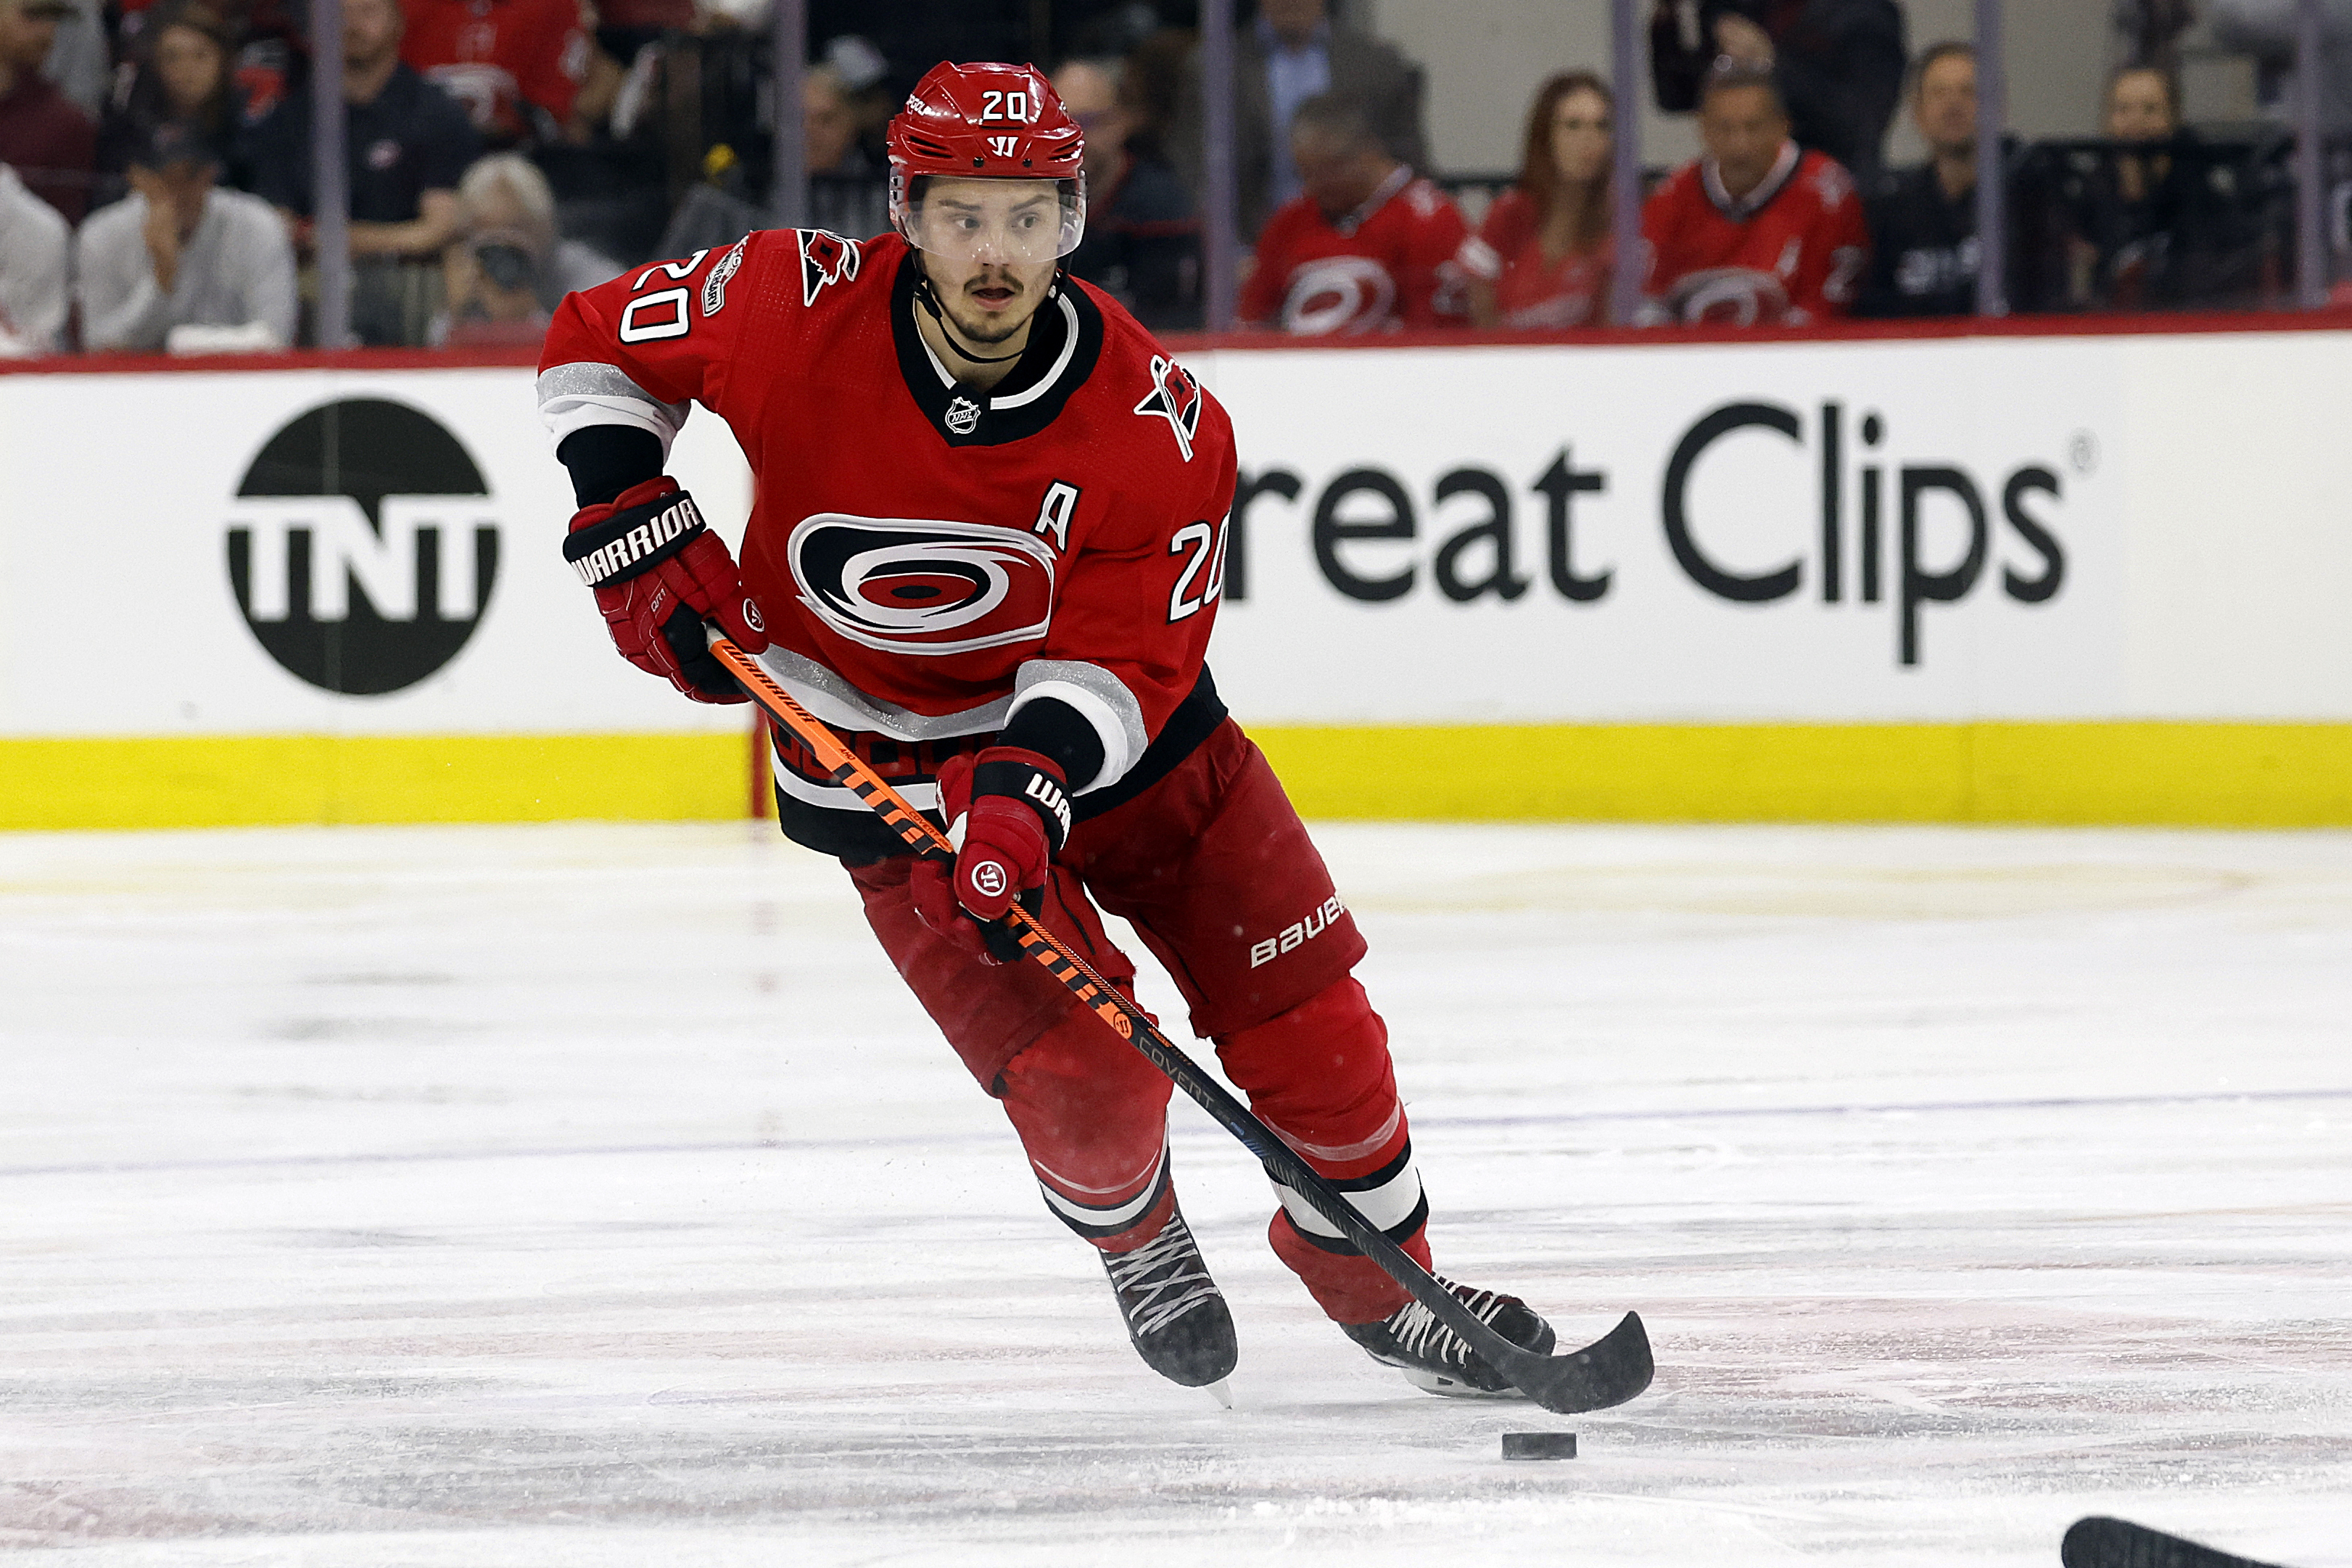 Hurricanes re-sign captain Jordan Staal to a 4-year contract worth